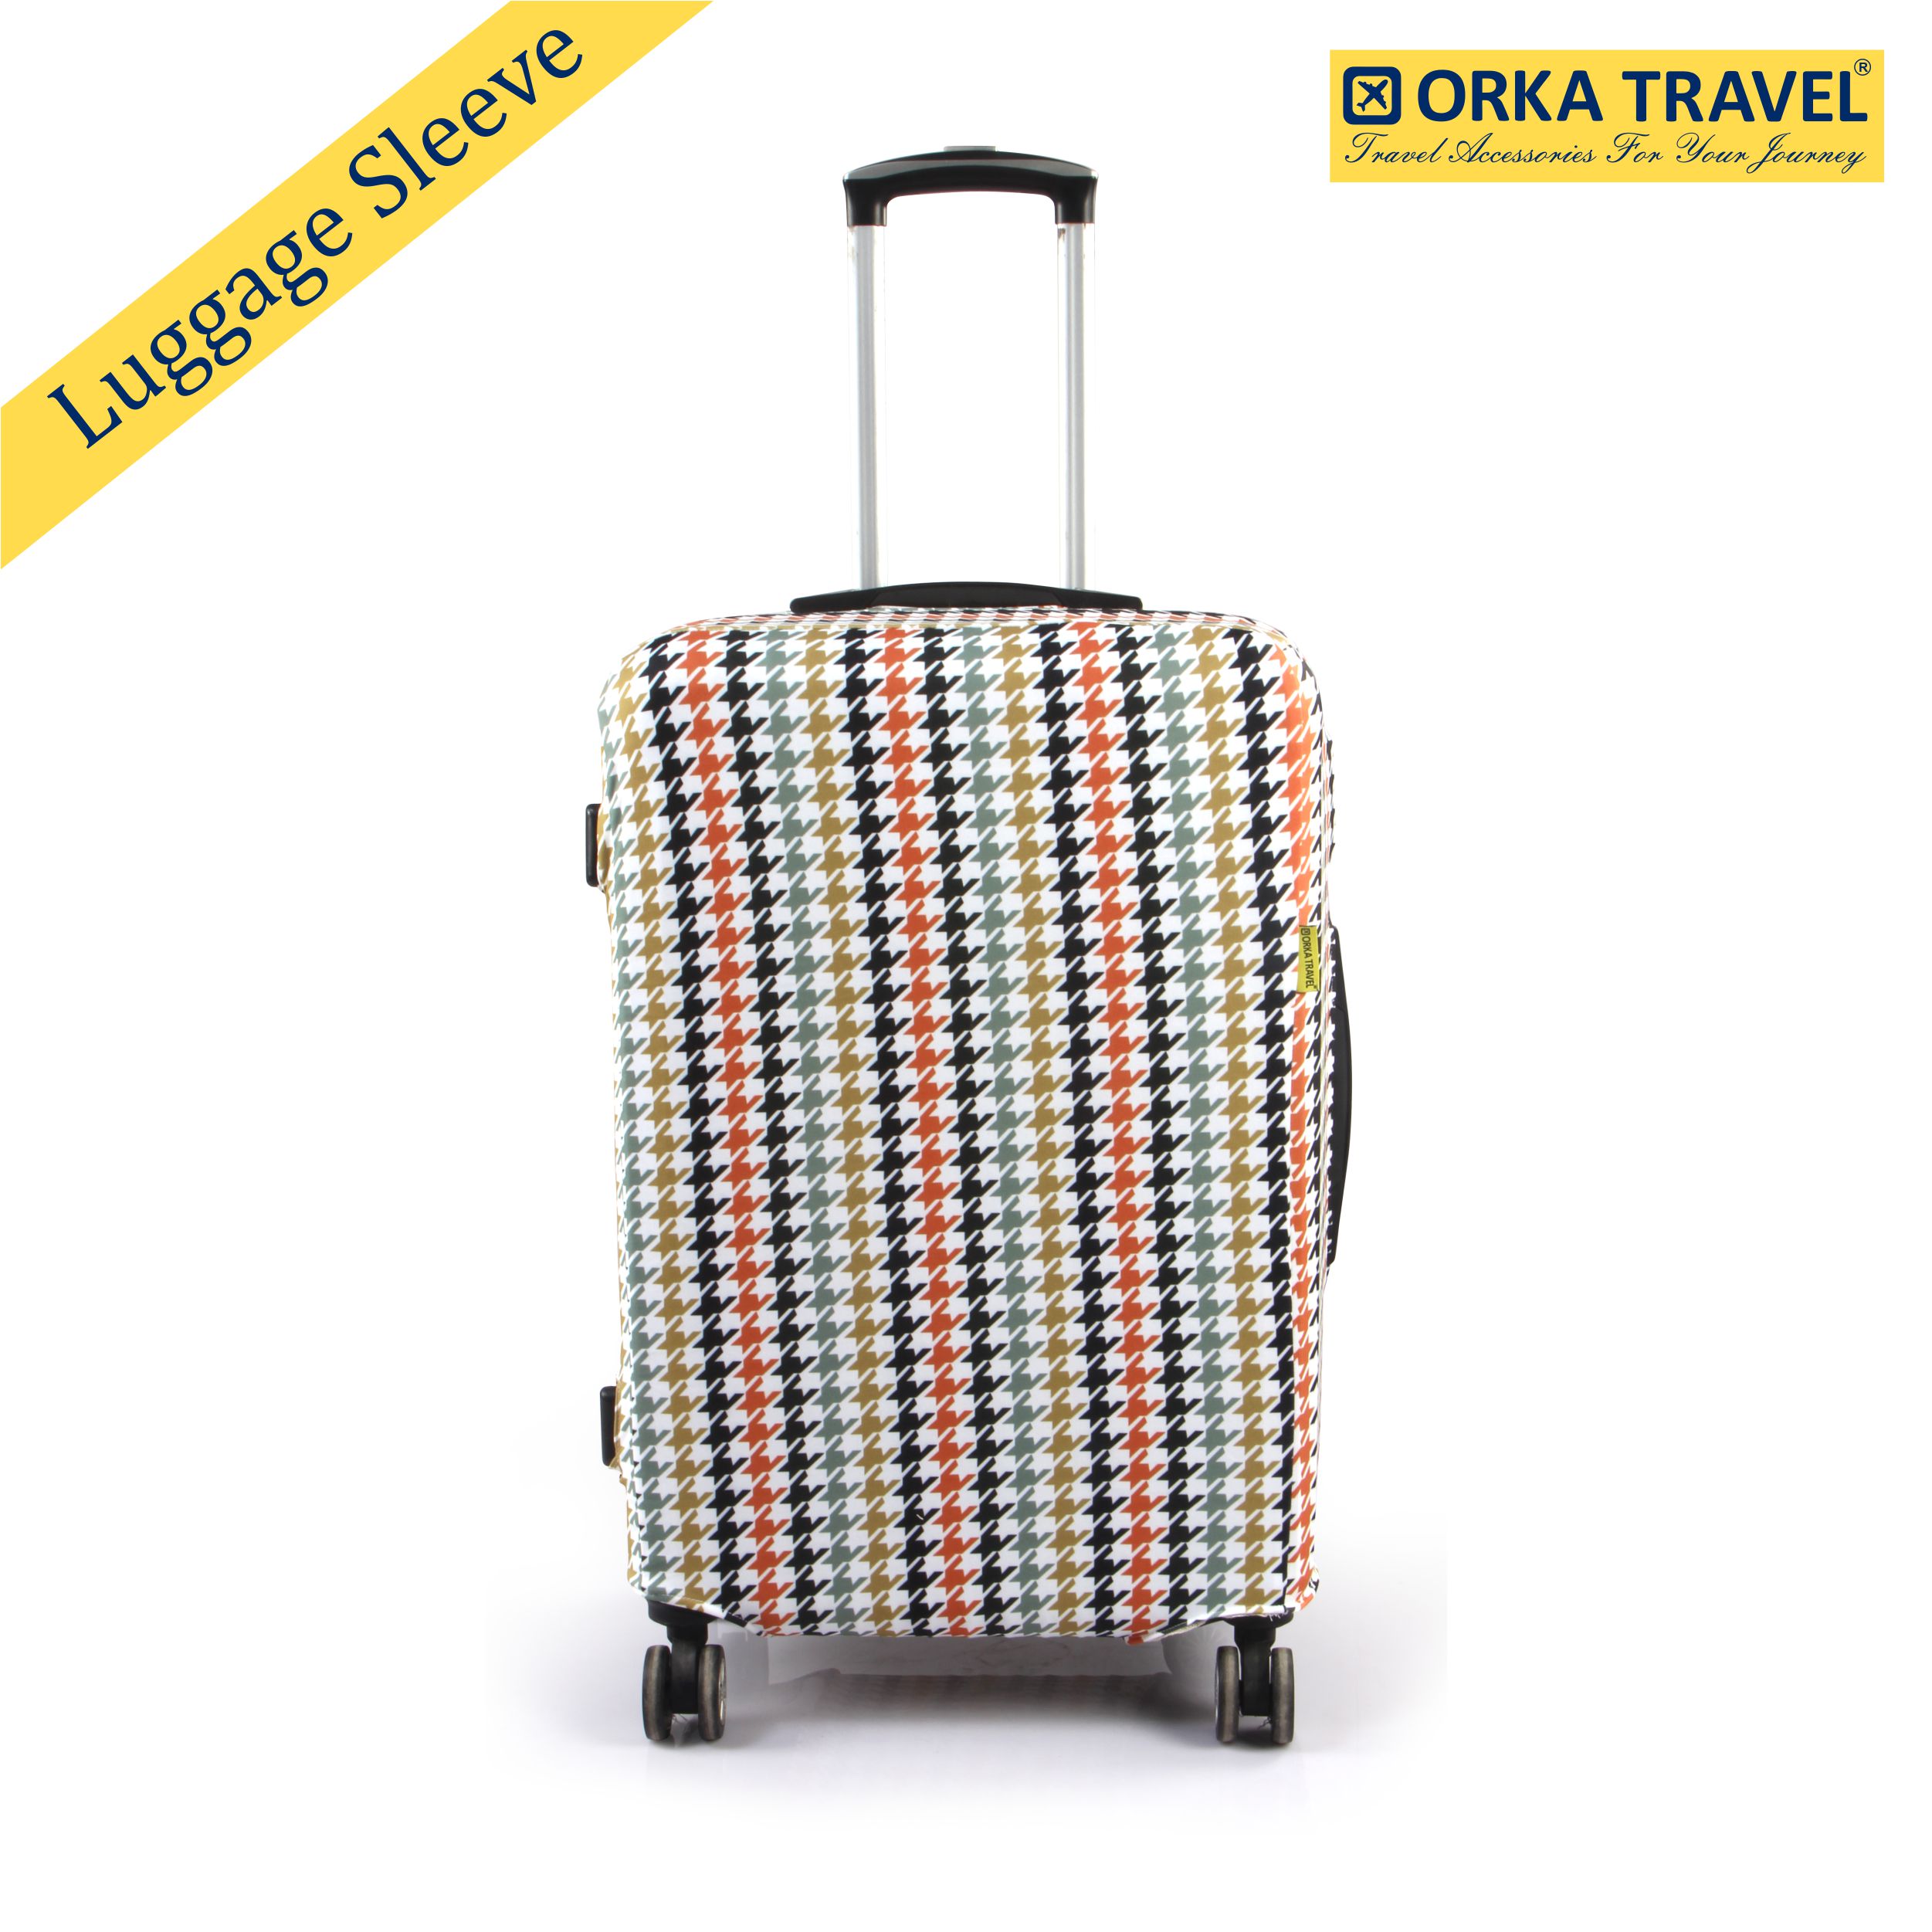 Orka Travel Luggage Cover Houndstooth  